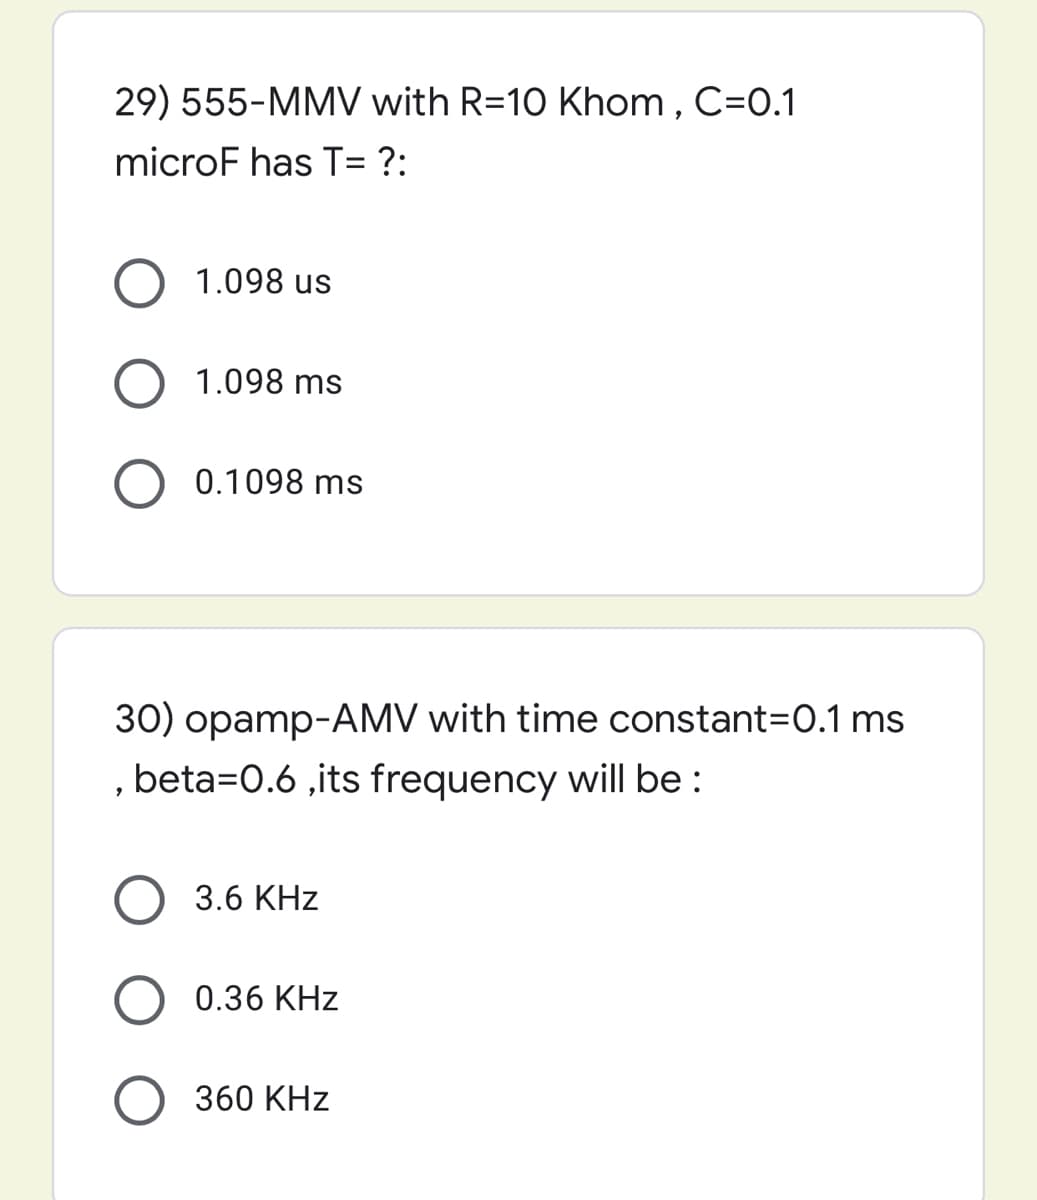 29) 555-MM with R=10 Khom, C=0.1
microF has T= ?:
O 1.098 us
1.098 ms
0.1098 ms
30) opamp-AMV with time constant=0.1 ms
, beta=0.6 ,its frequency will be :
3.6 KHz
0.36 KHz
360 KHz
